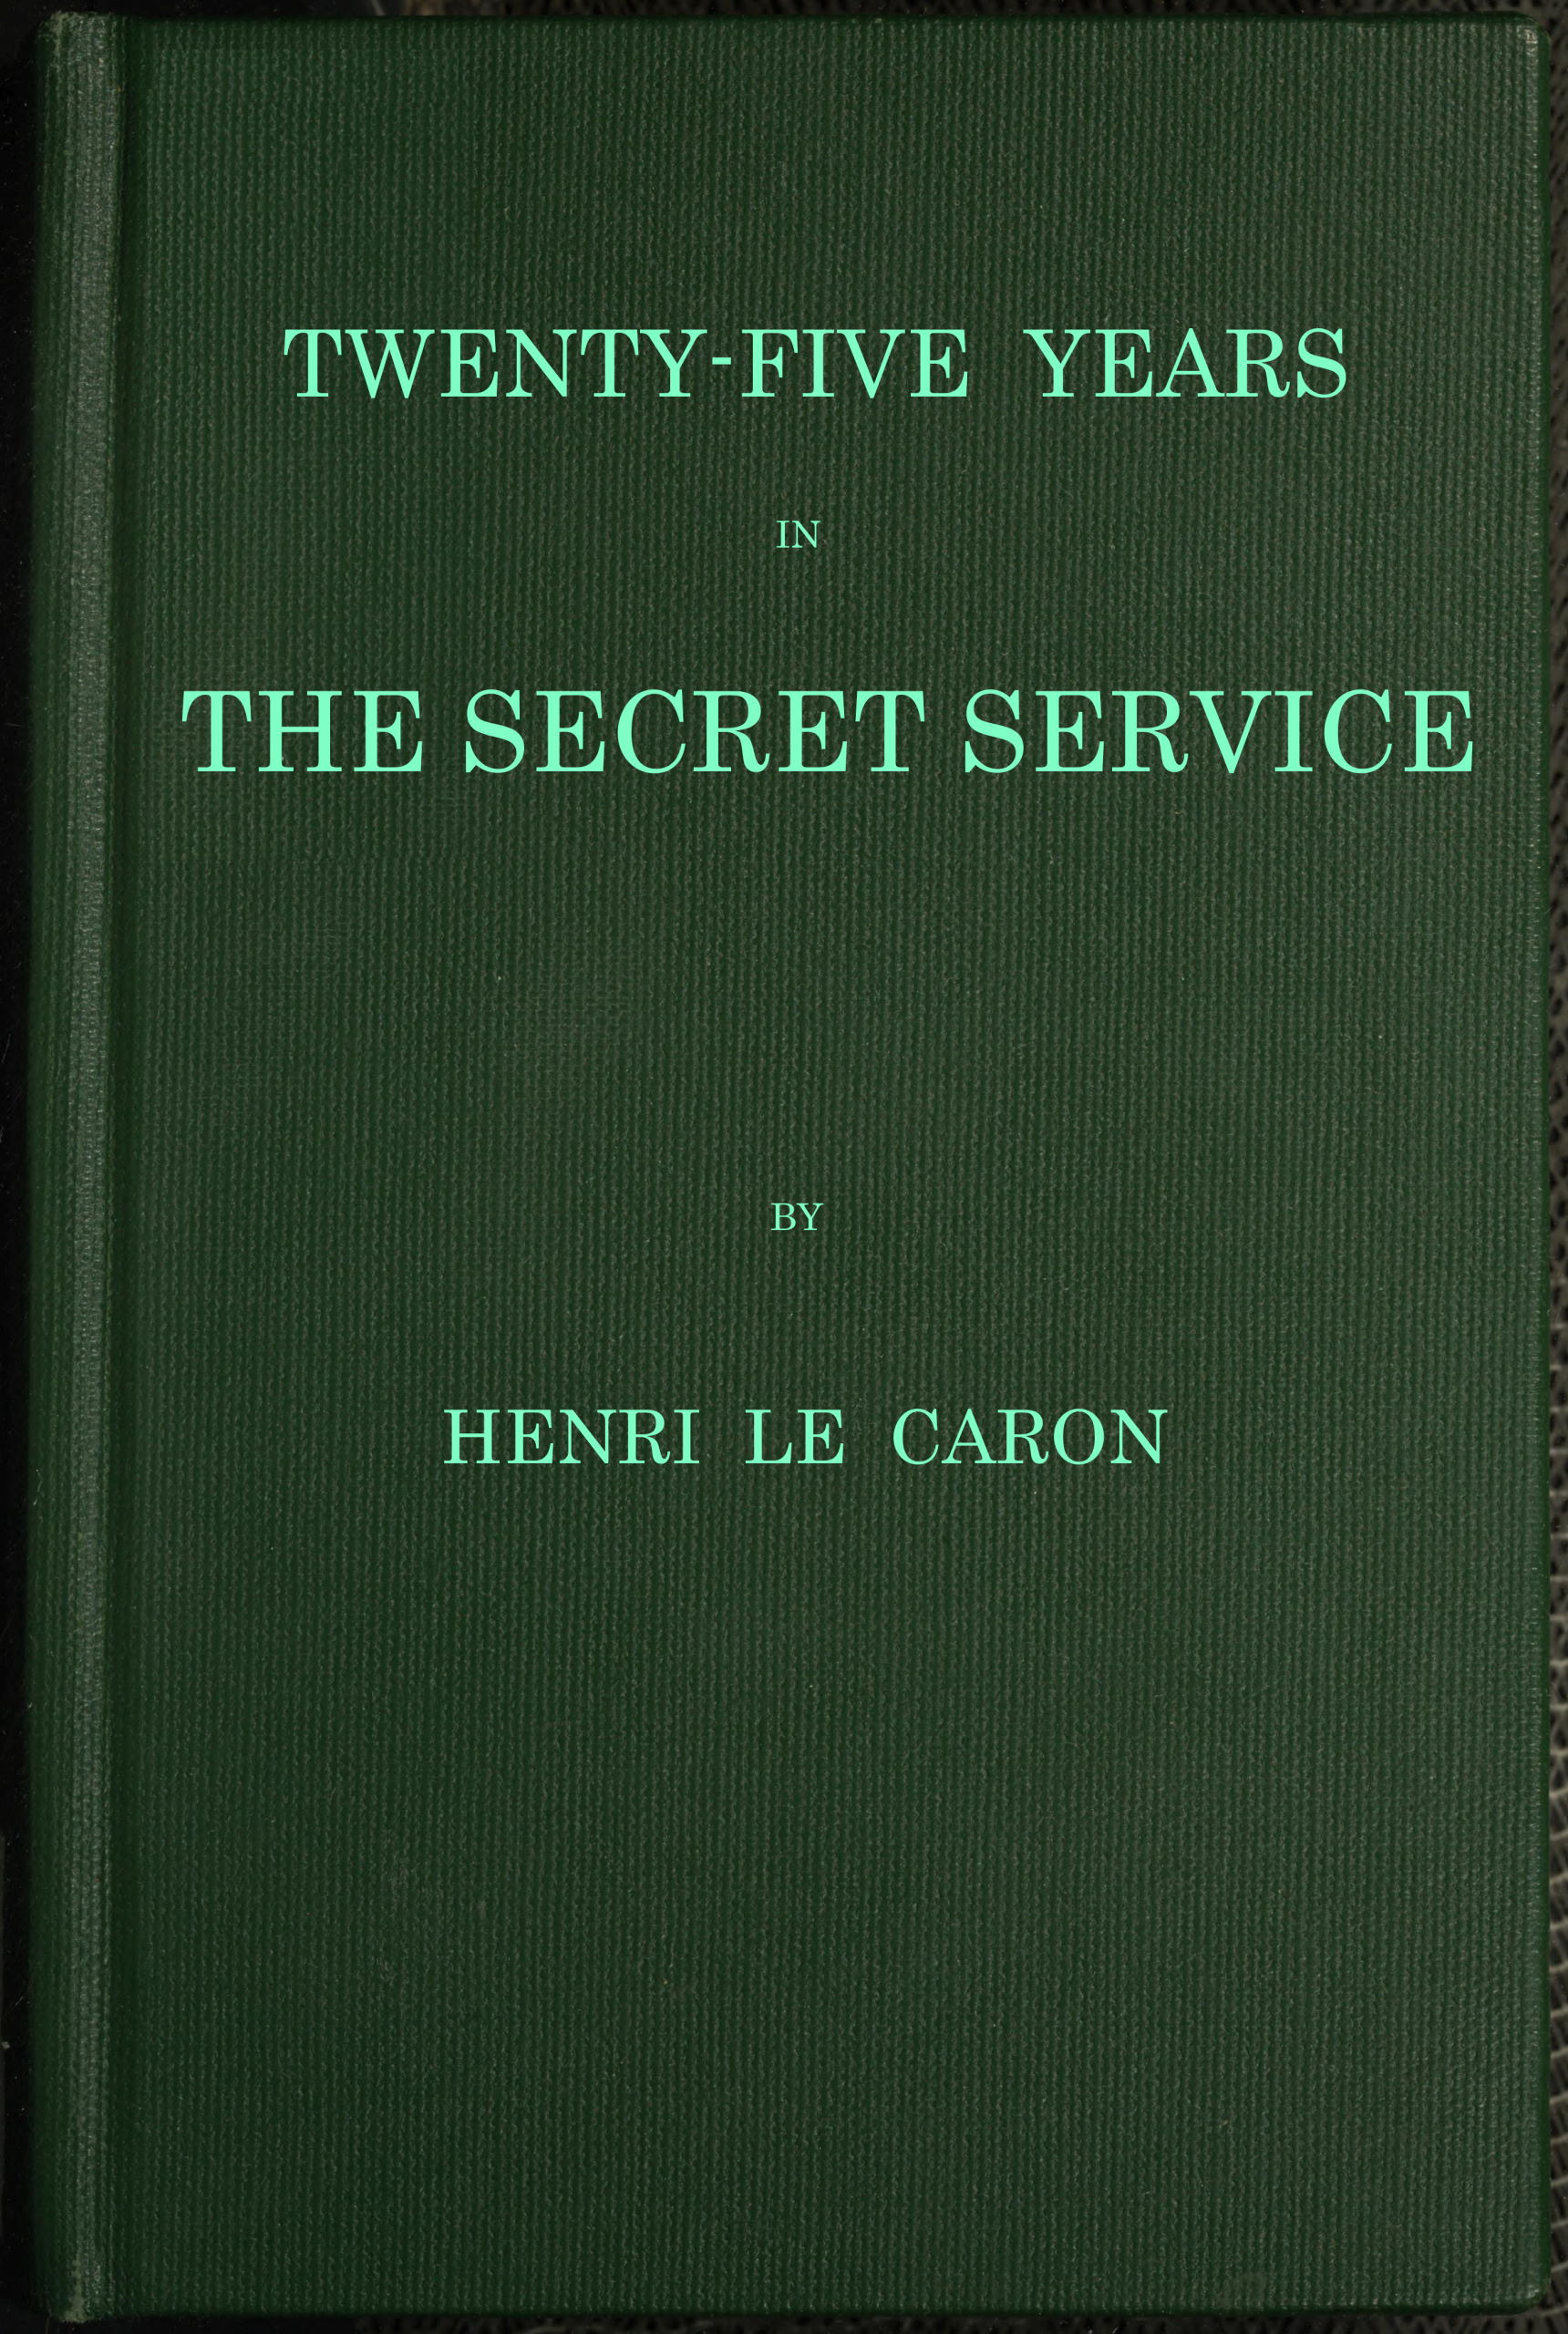 original cover with title and author added